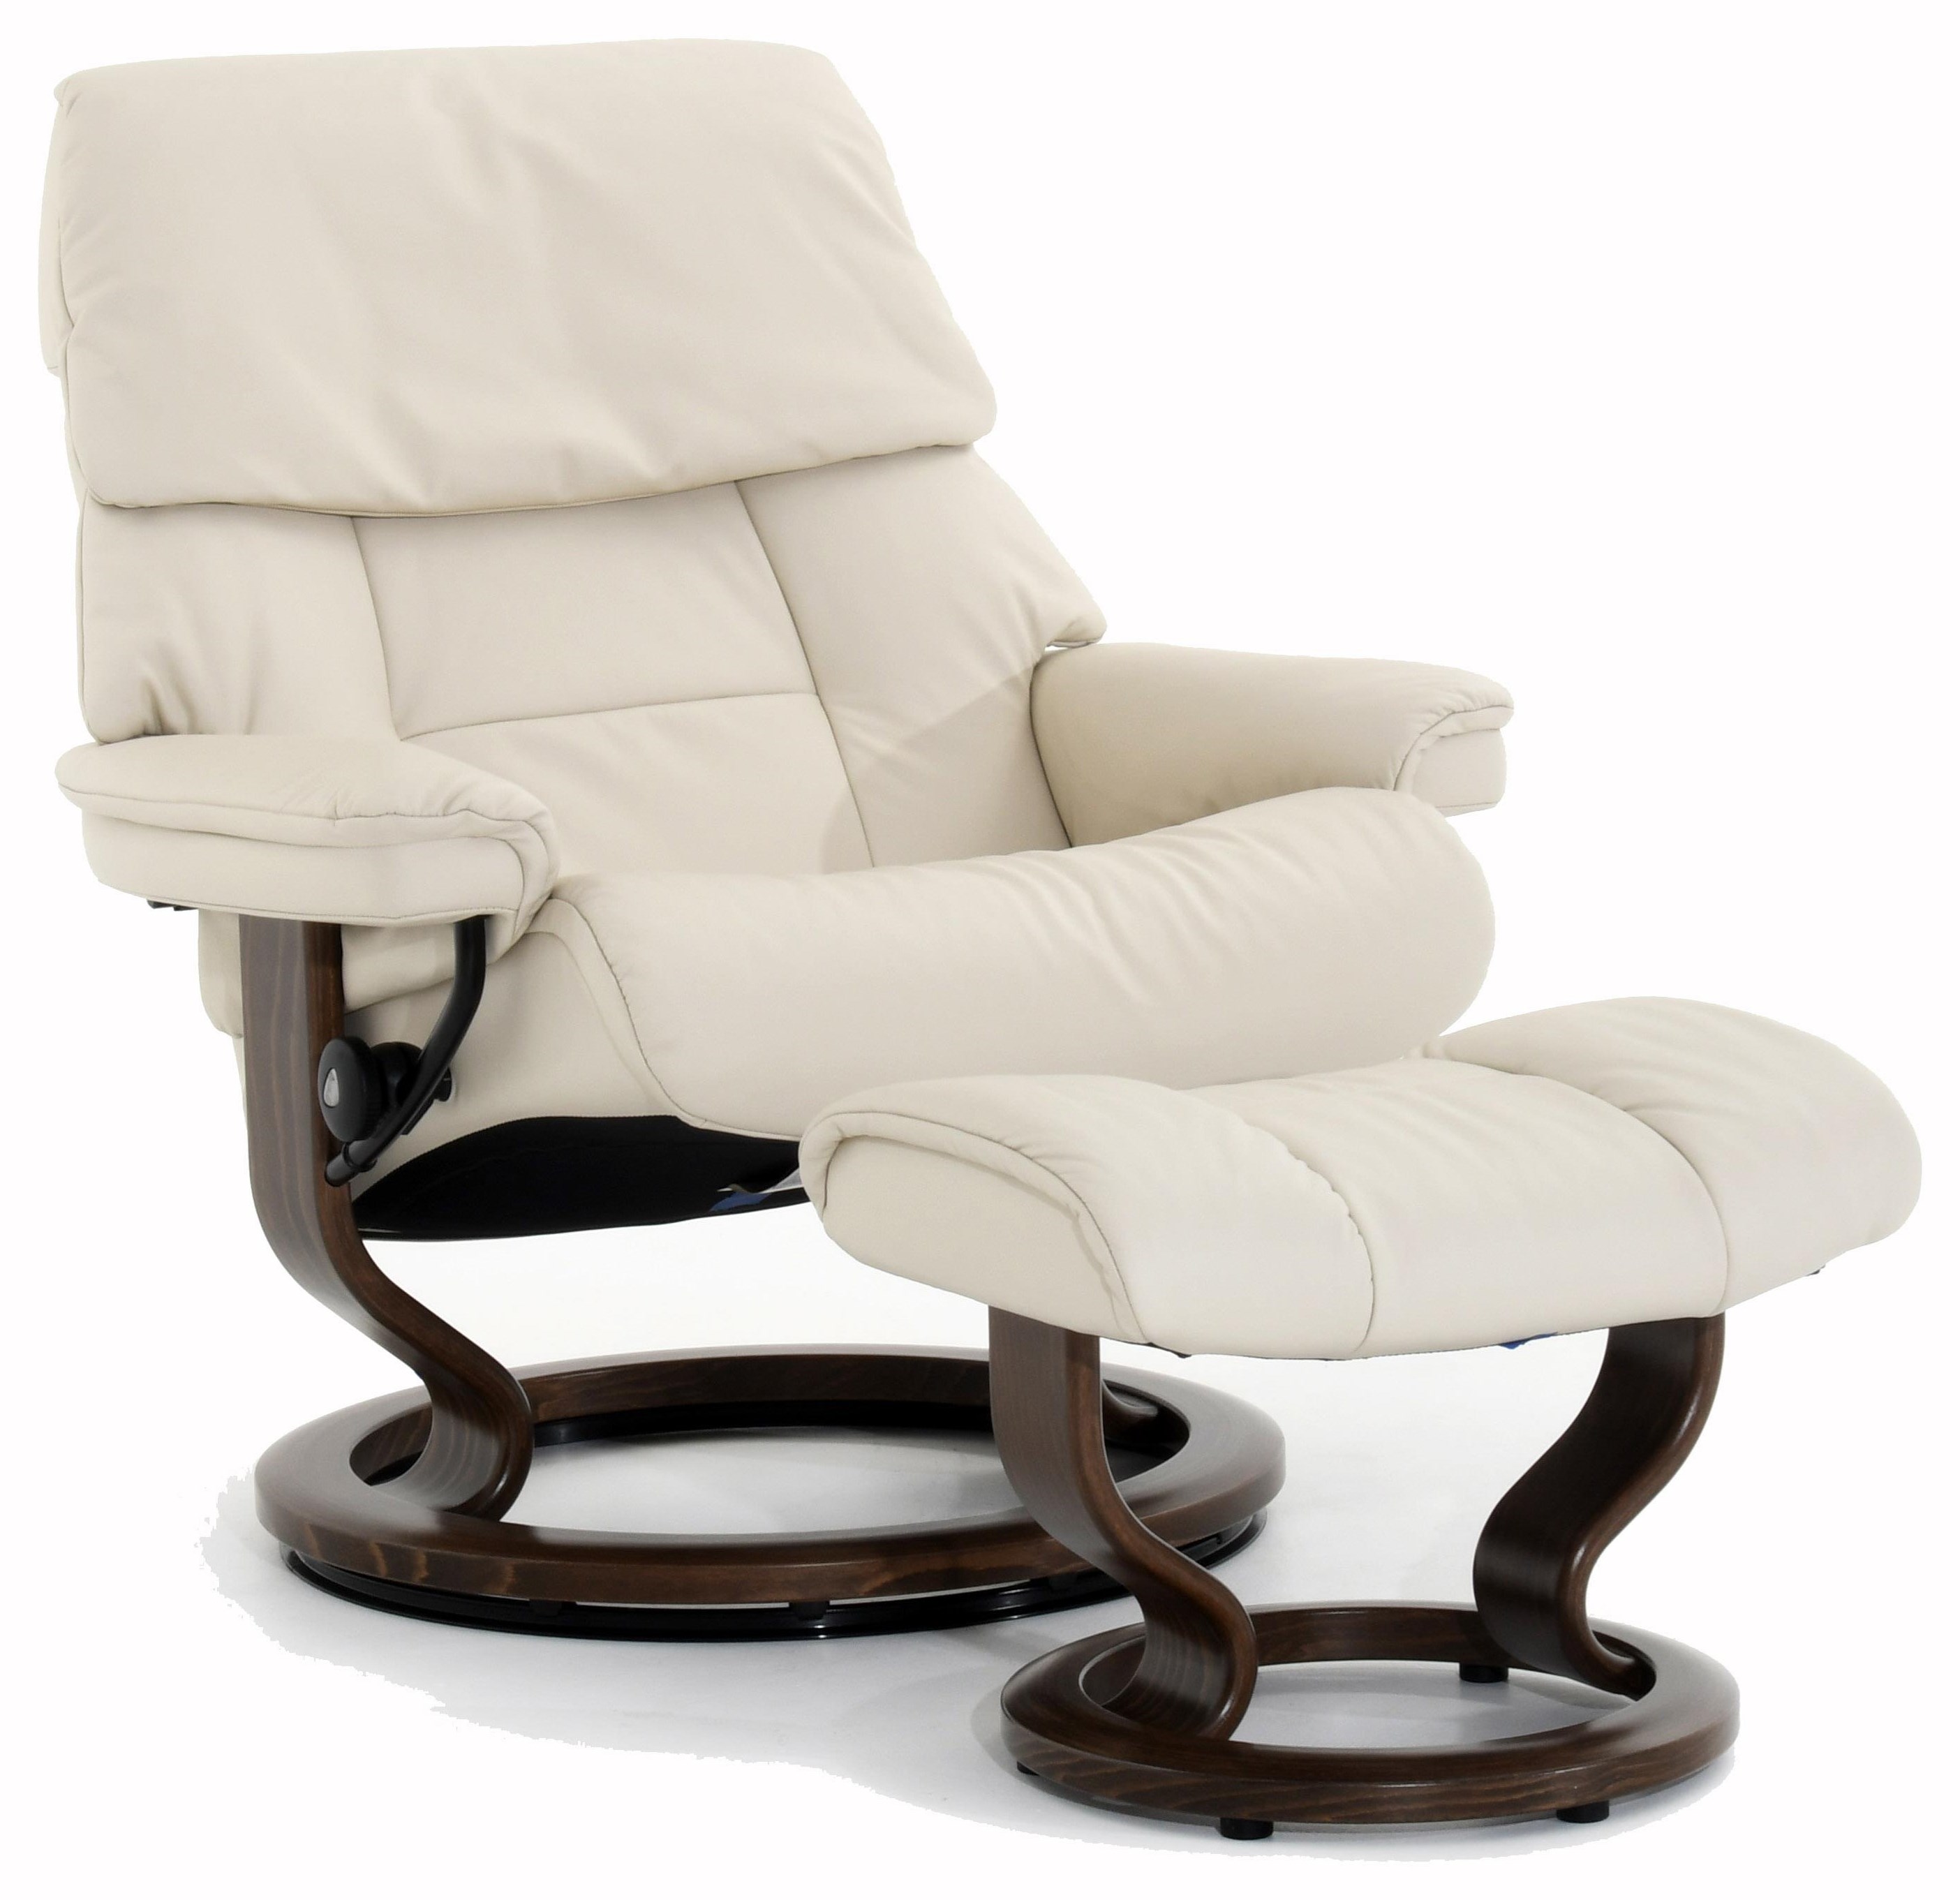 Stressless Stressless Ruby 158199476 Large Classic Reclining Chair 